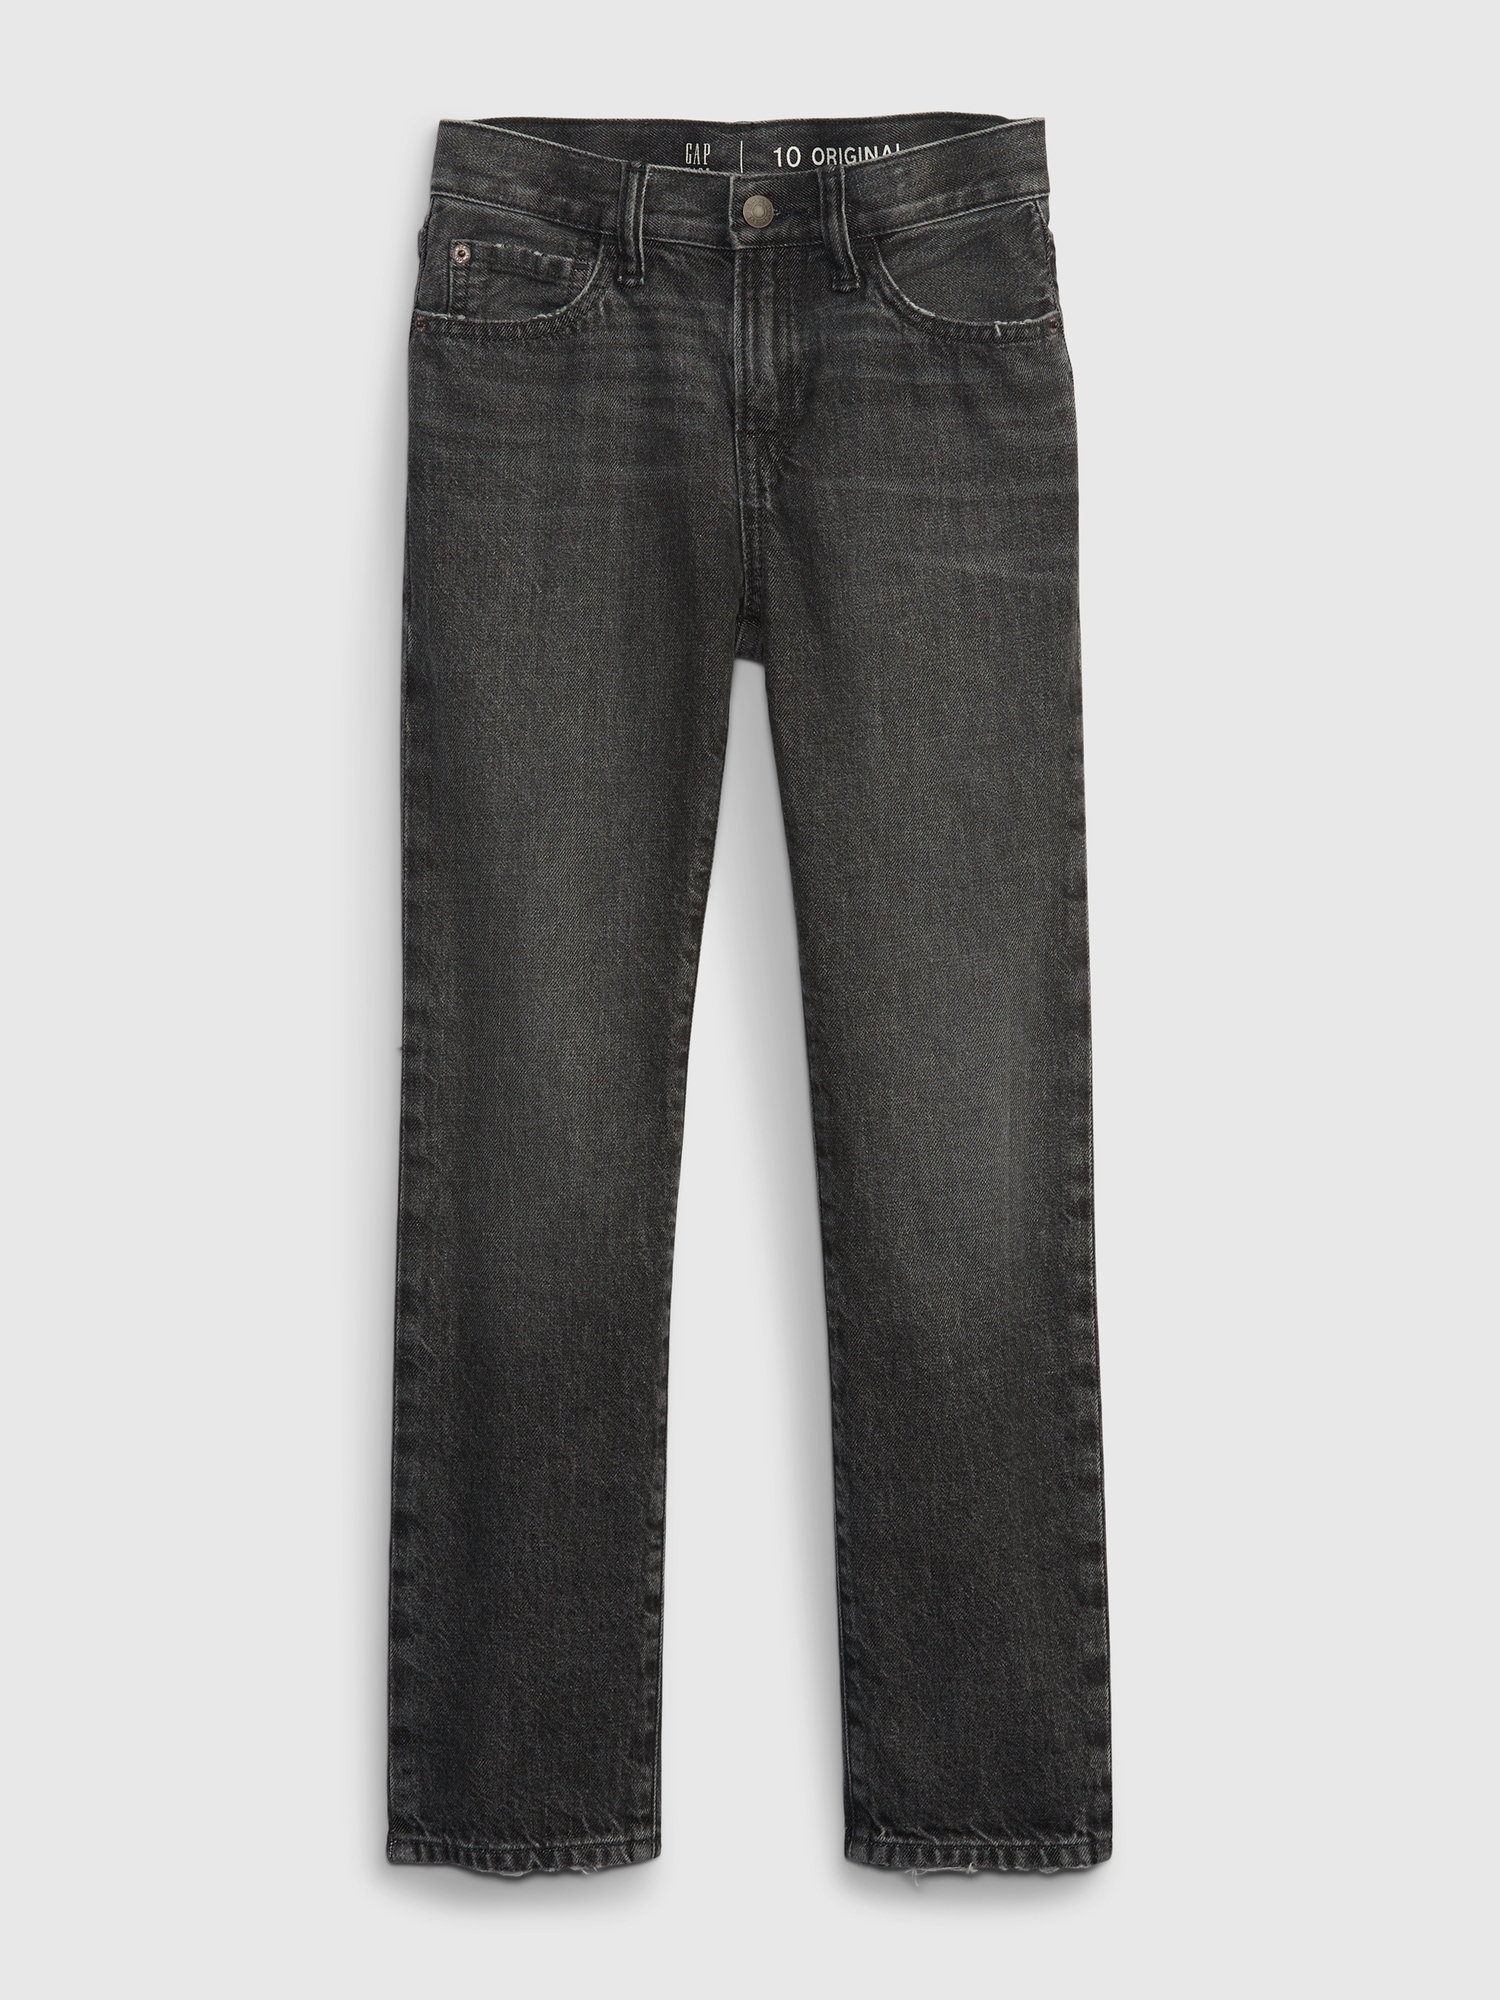 Kids Original Straight Jeans with Washwell | Gap